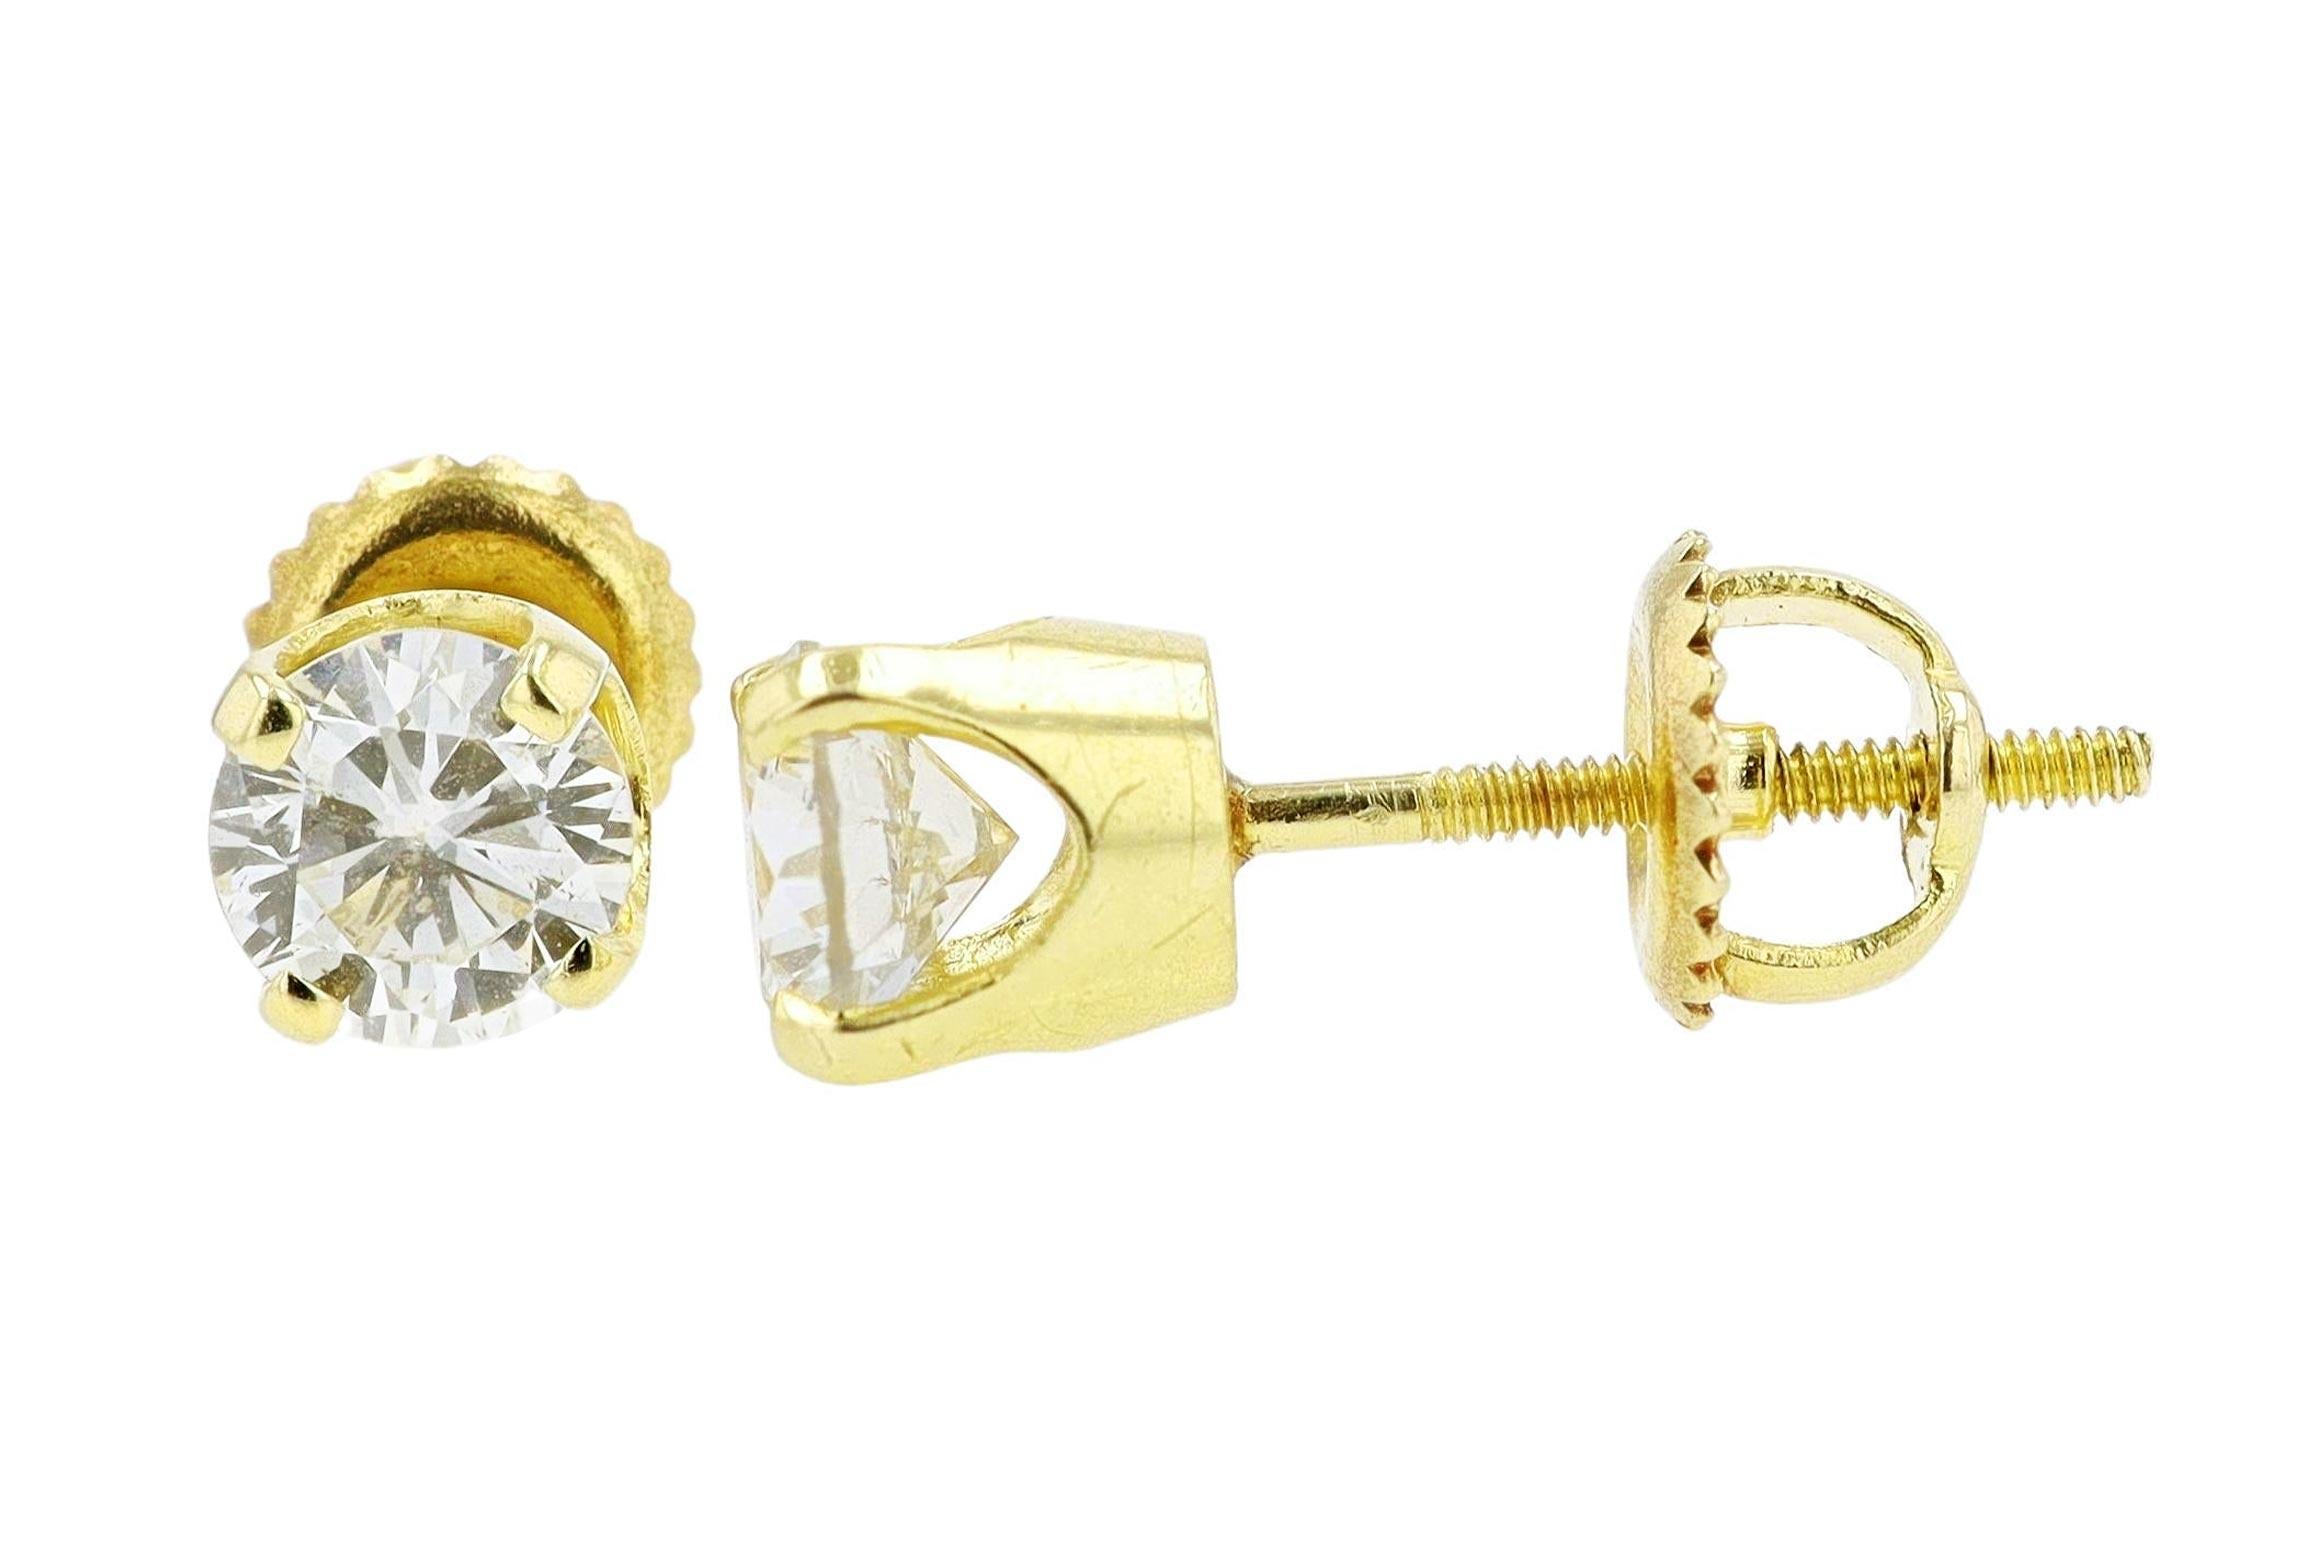 Vintage Yellow Gold 1 Carat Round Diamond Stud Earrings In Good Condition For Sale In Santa Barbara, CA